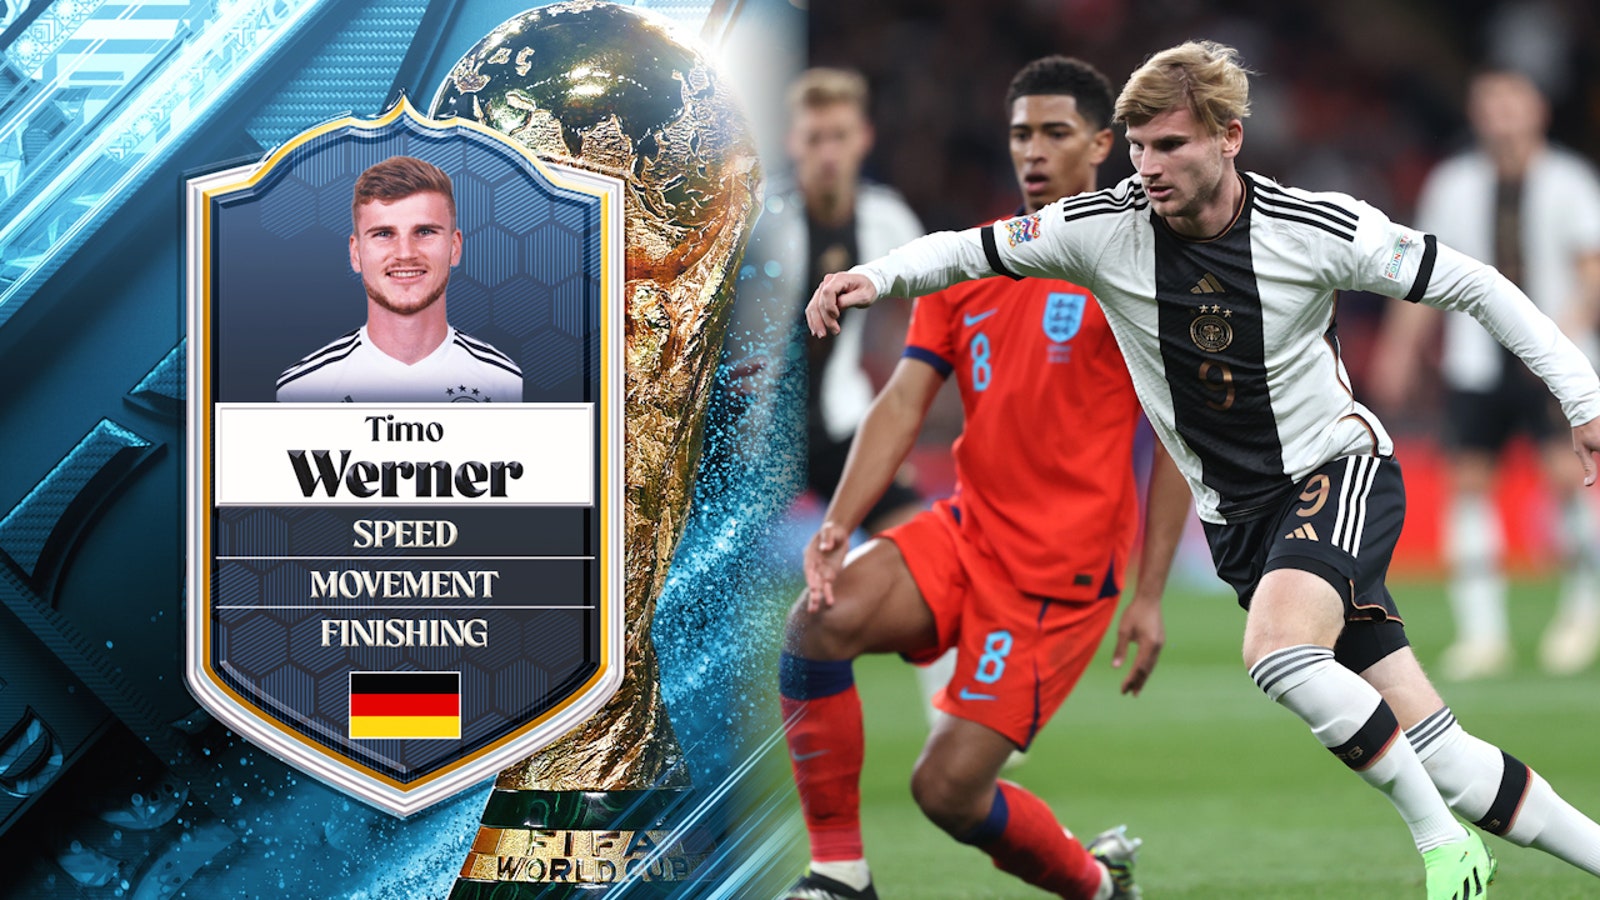 Timo Werner is the German X-Factor